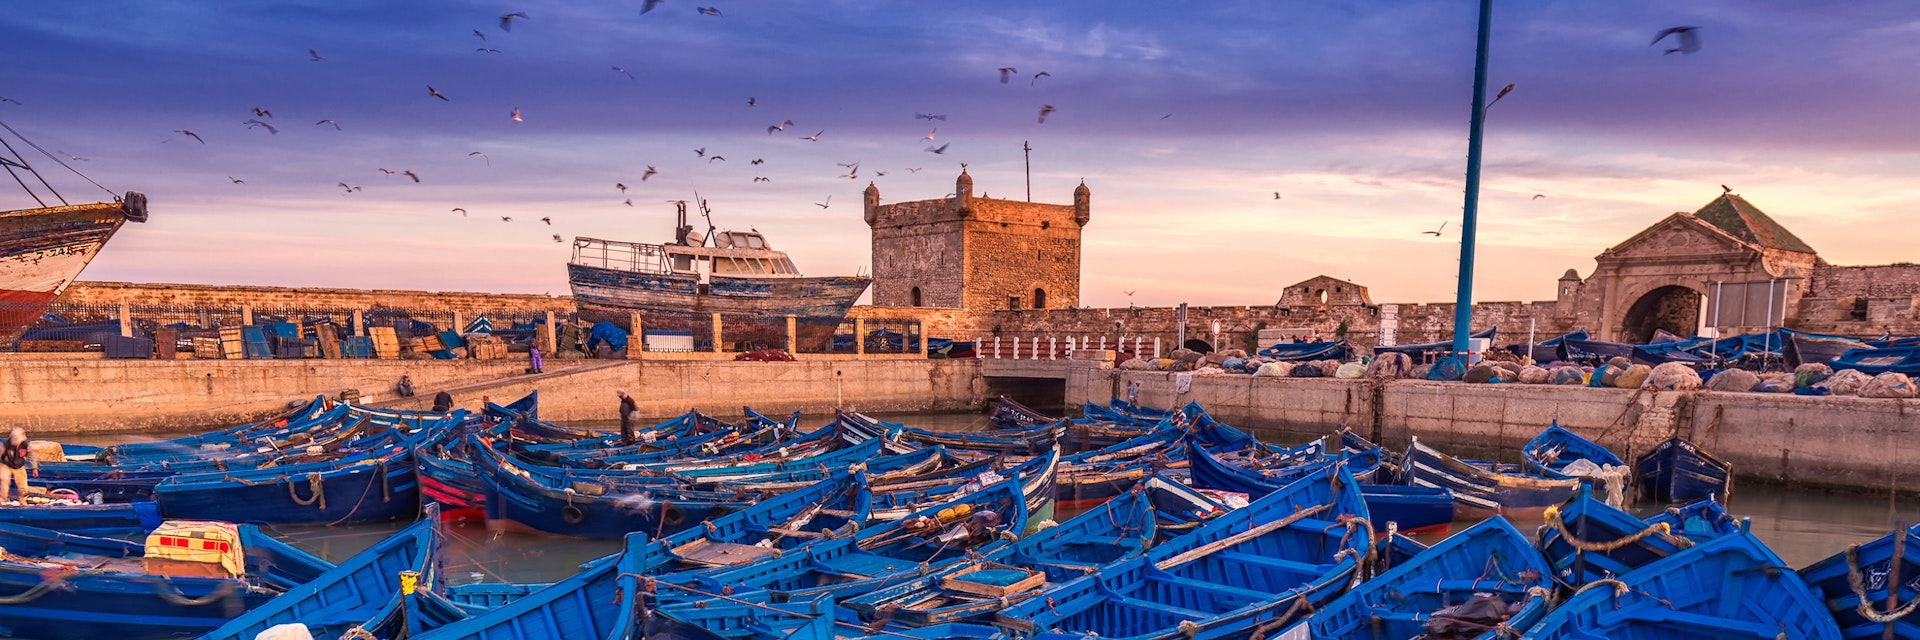 Essaouira port in Morocco. Shot  after sunset at blue hour.; Shutterstock ID 469077956; Your name (First / Last): Lauren Keith; GL account no.: 65050; Netsuite department name: Online Editorial; Full Product or Project name including edition: Essaouira BiT